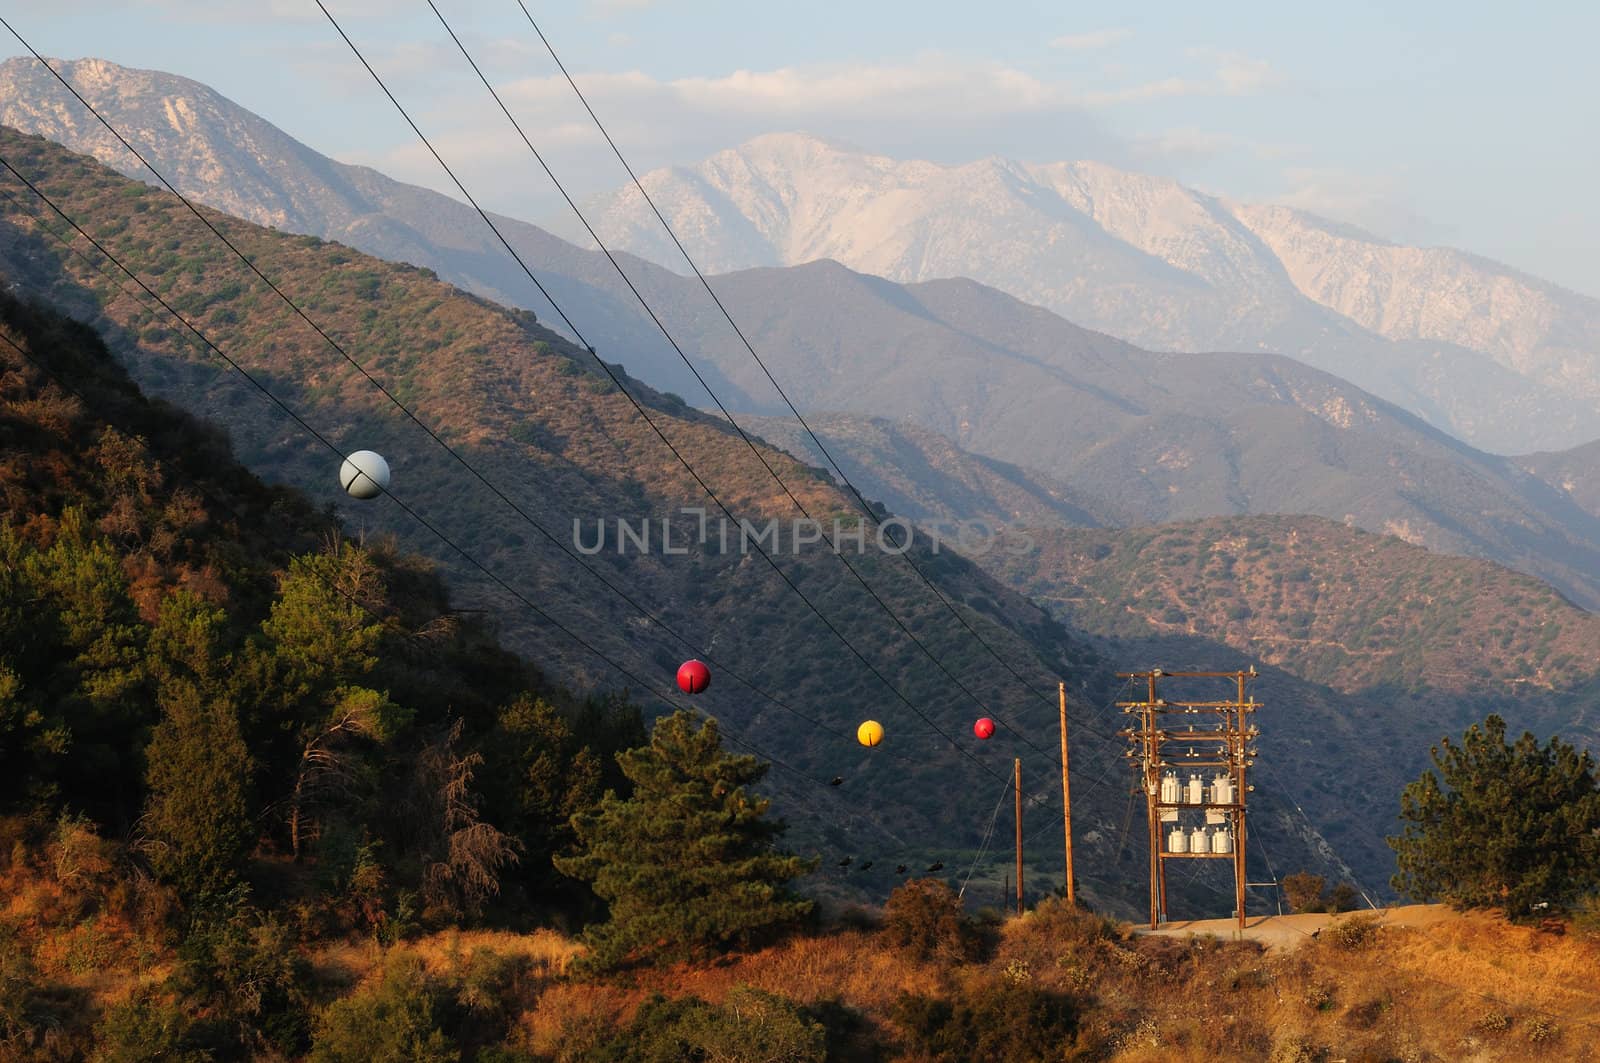 large power line with marker balls travels through the mountains